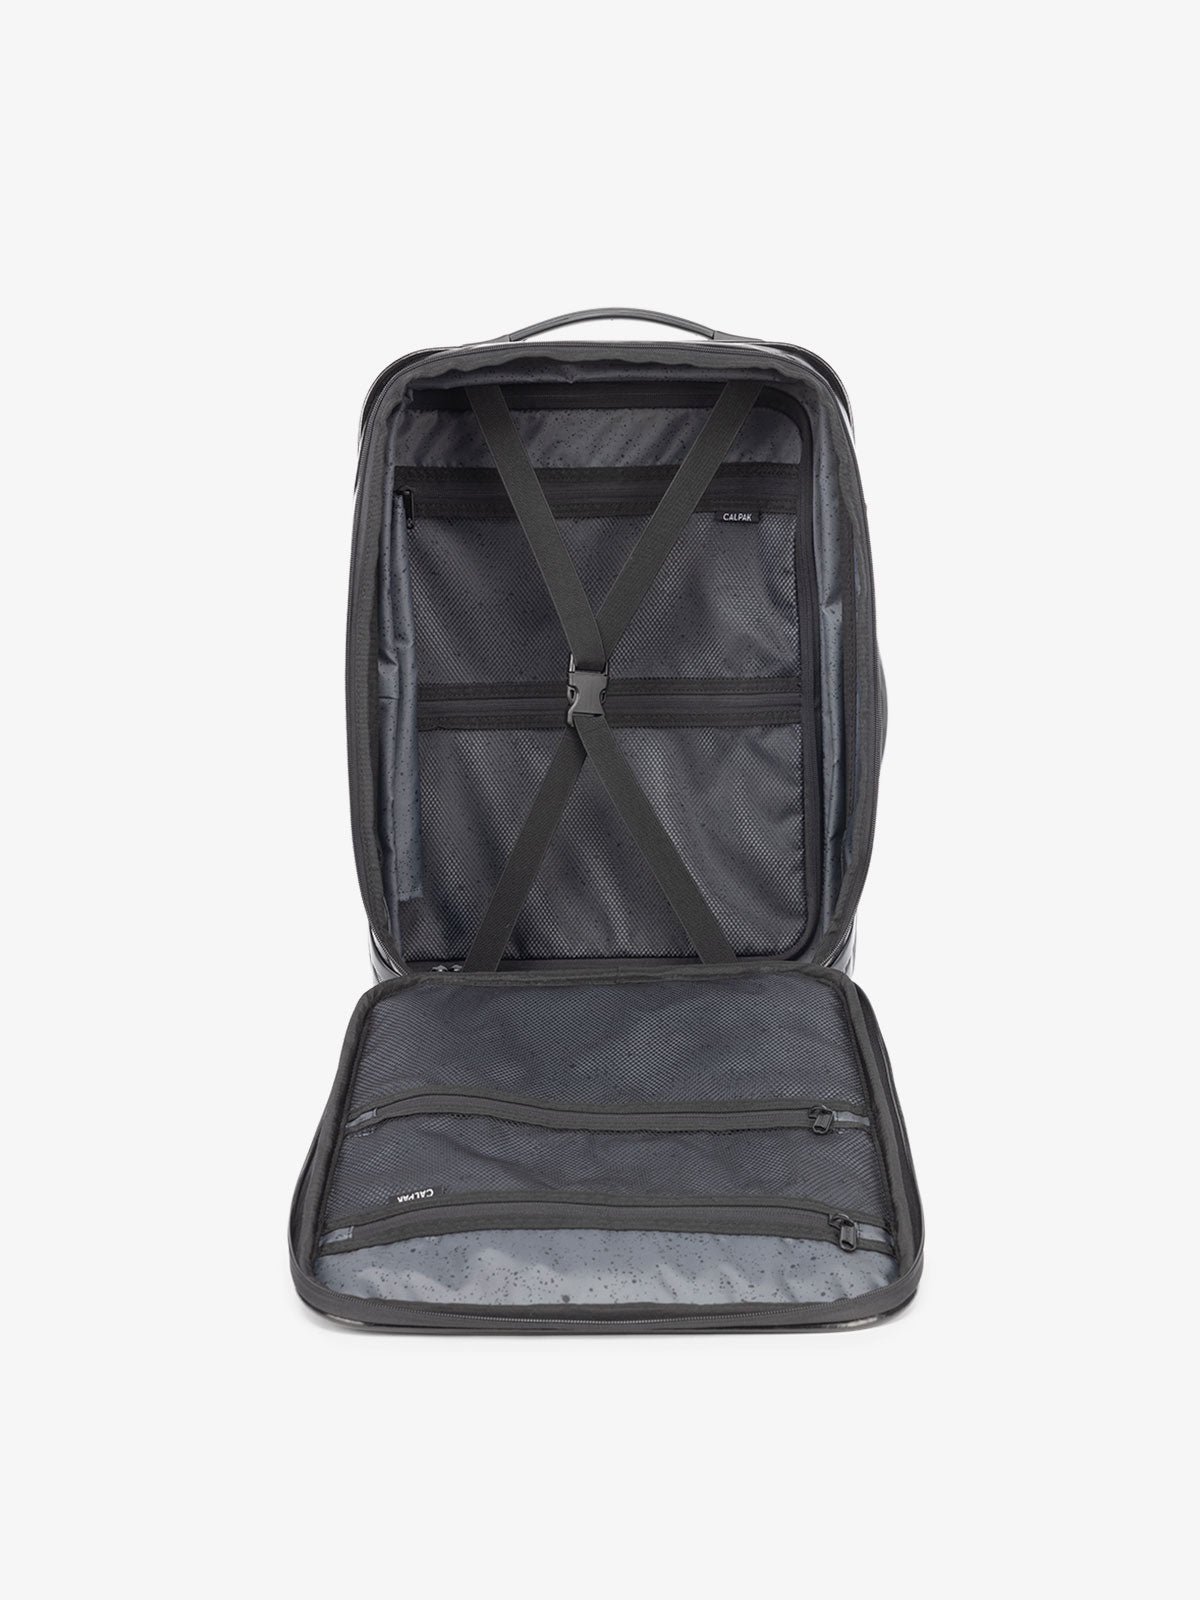 CALPAK Terra Carry-On Luggage interior with multiple zippered compartments and compression strap in obsidian